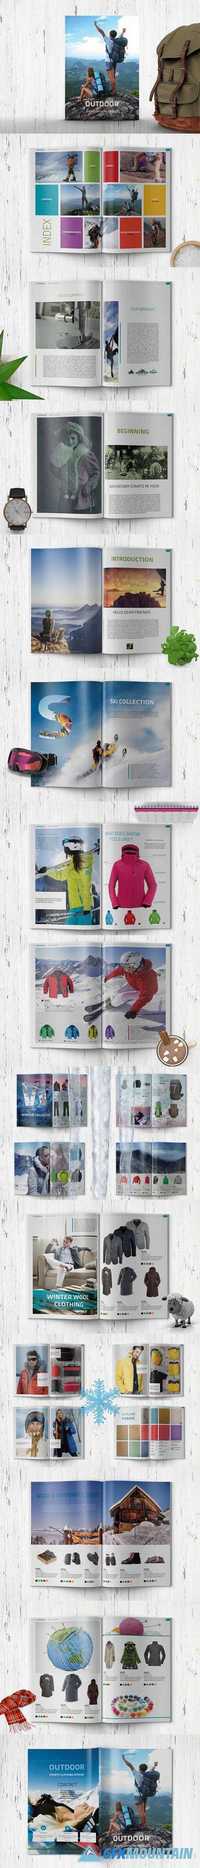 Outdoor - Clothing Product Catalogue 735725